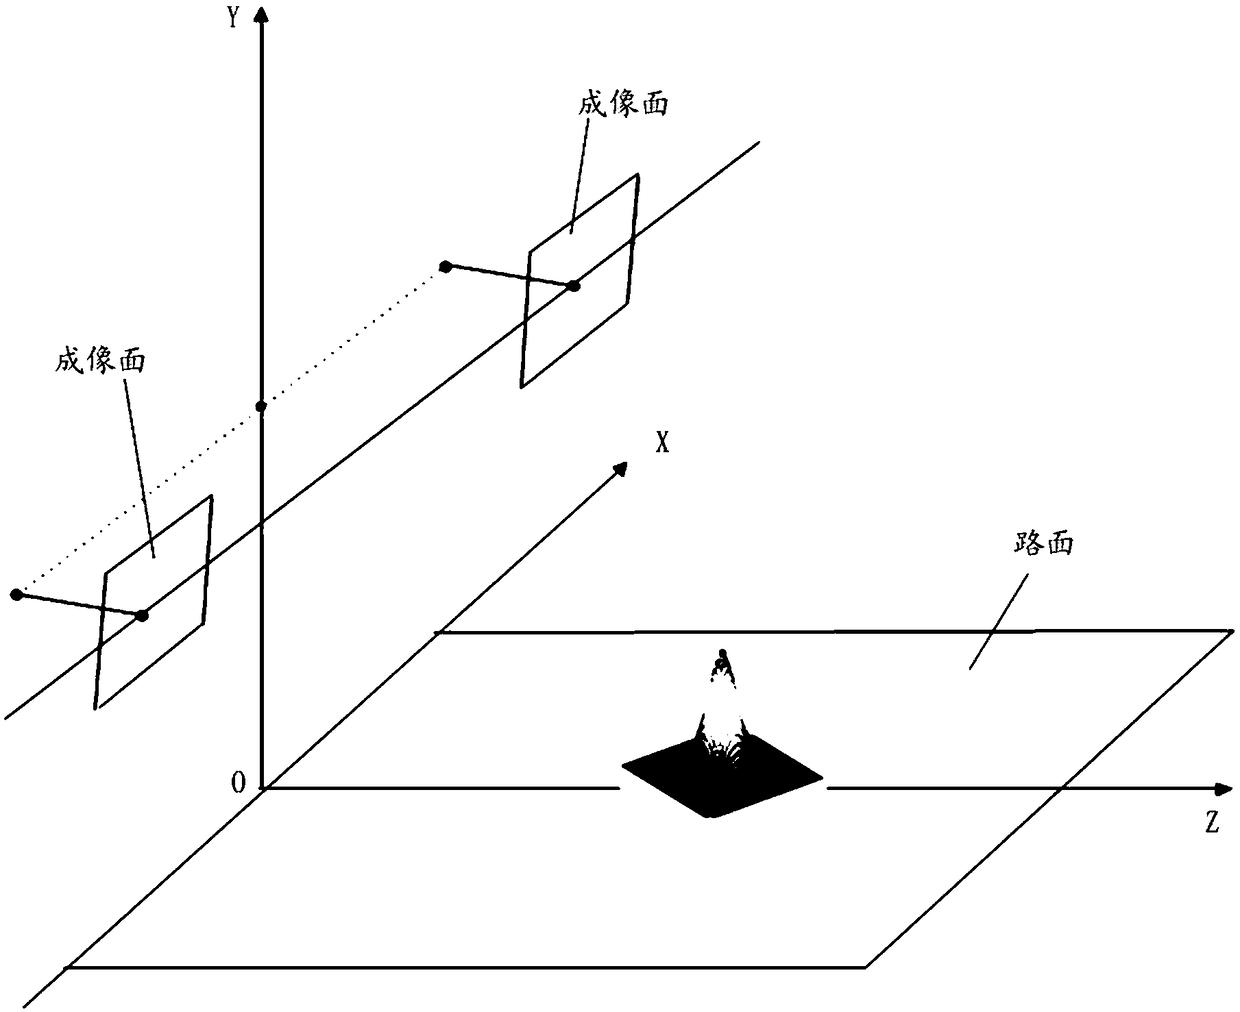 A height limit early warning method based on binocular stereo vision